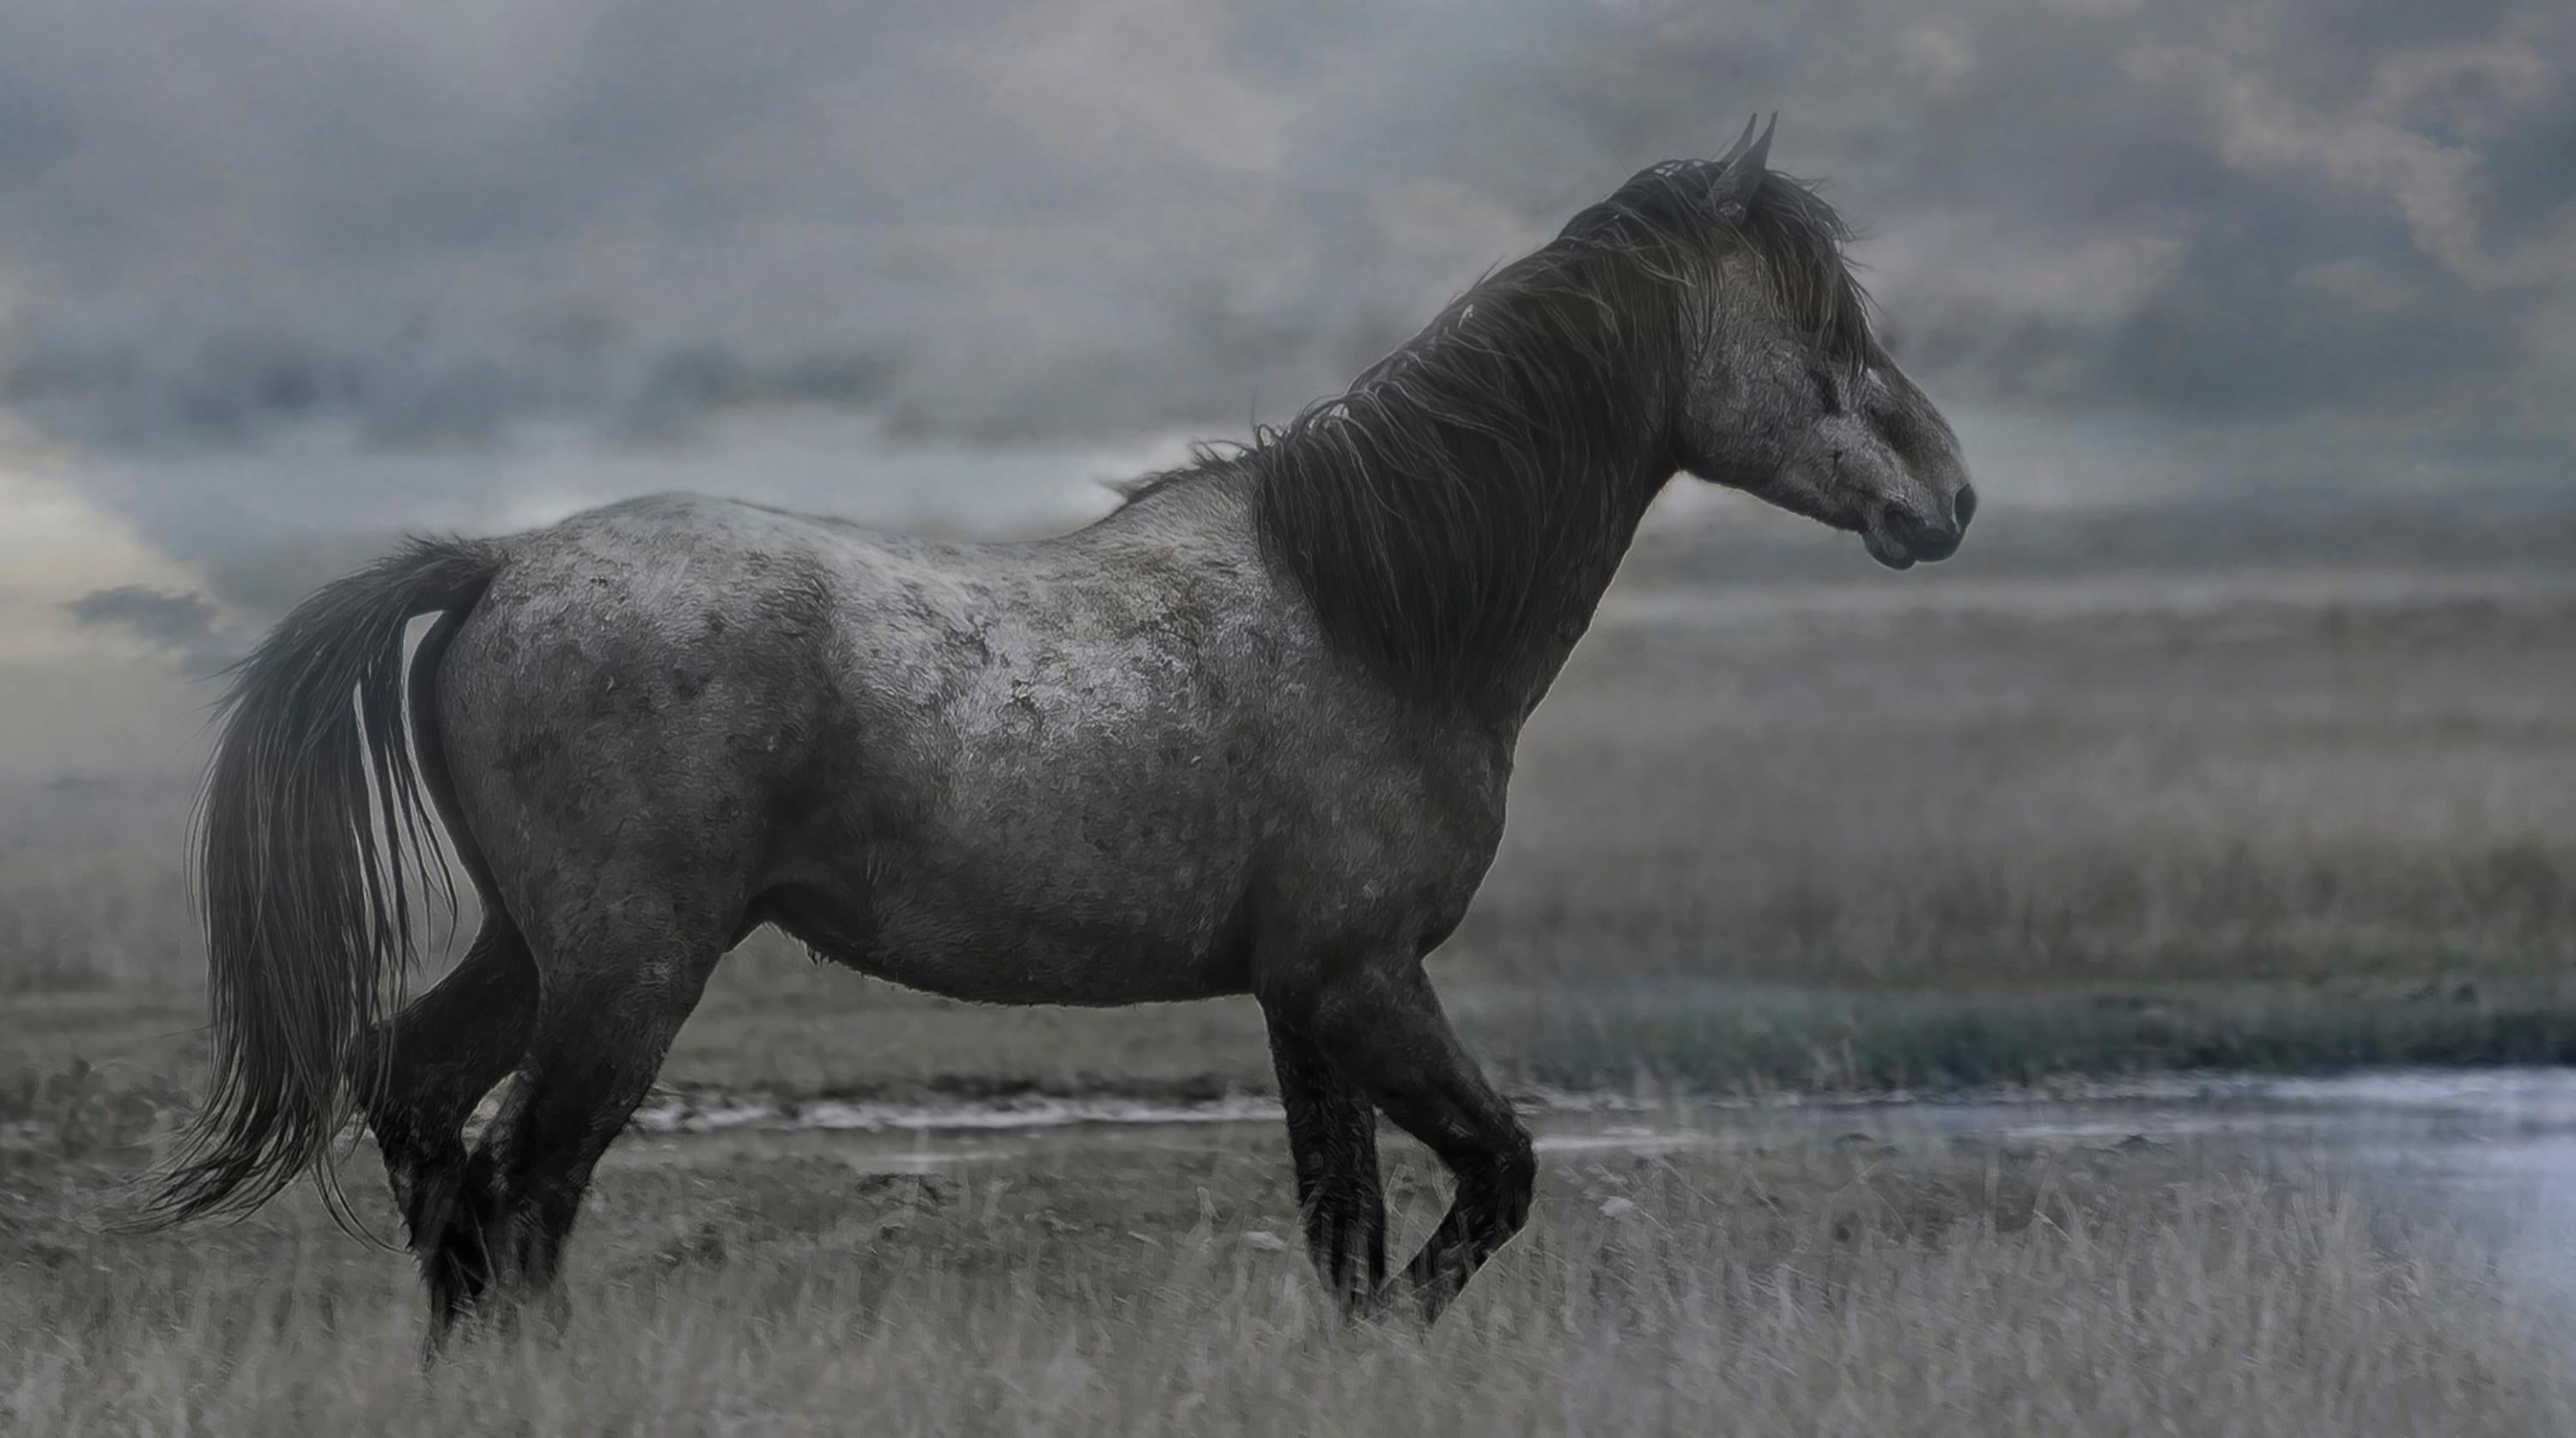 Once Upon a Time in the West - 40x 80  Photography of Wild Horse  Photograph - Print by Shane Russeck